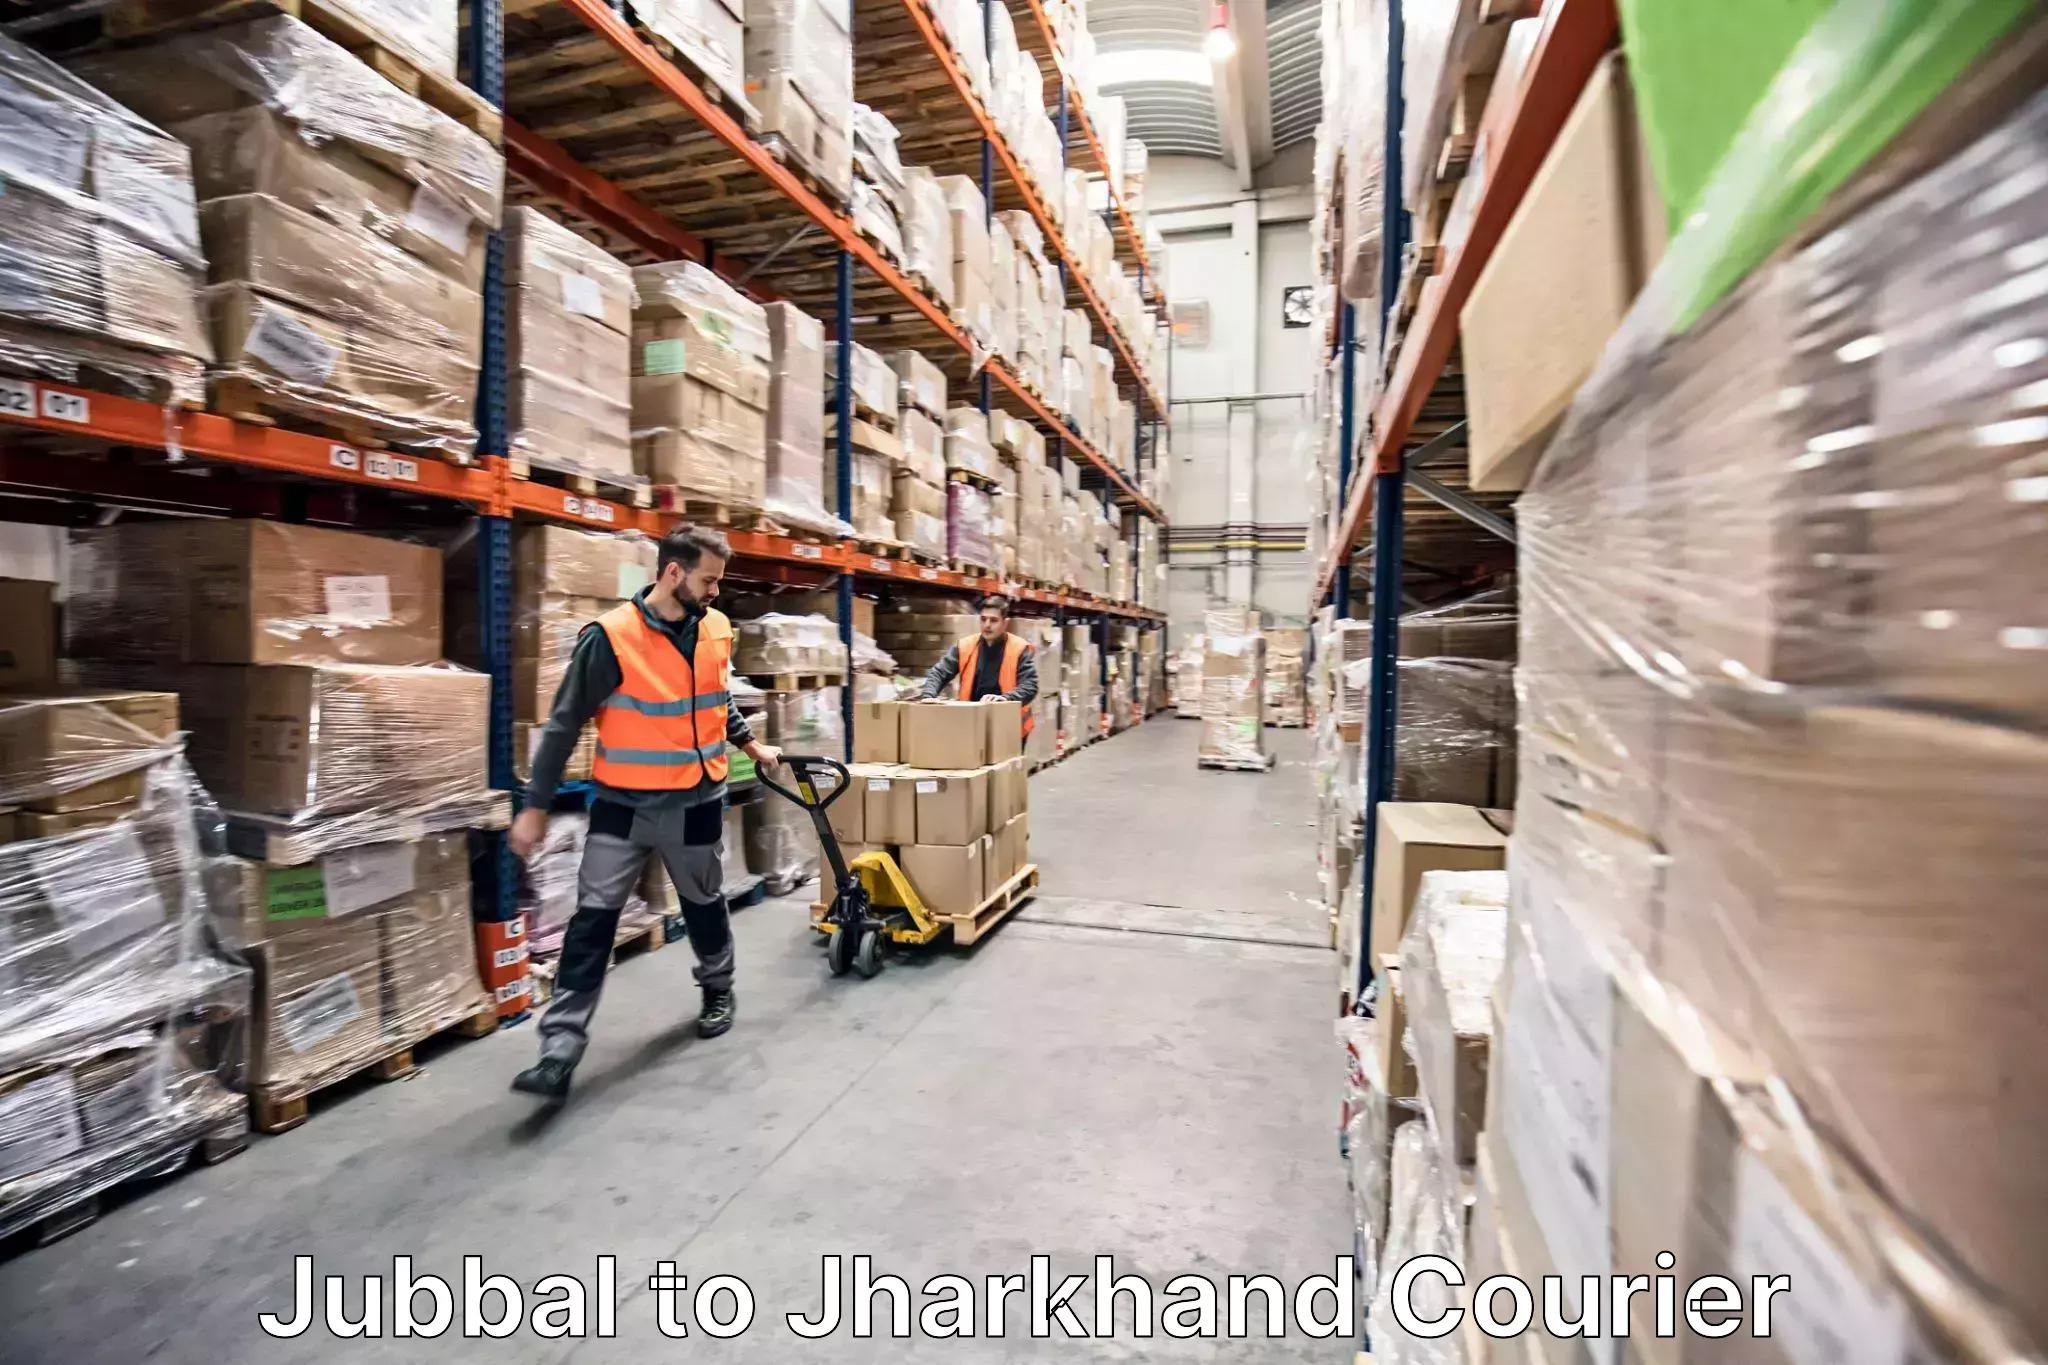 Furniture delivery service Jubbal to Dhalbhumgarh